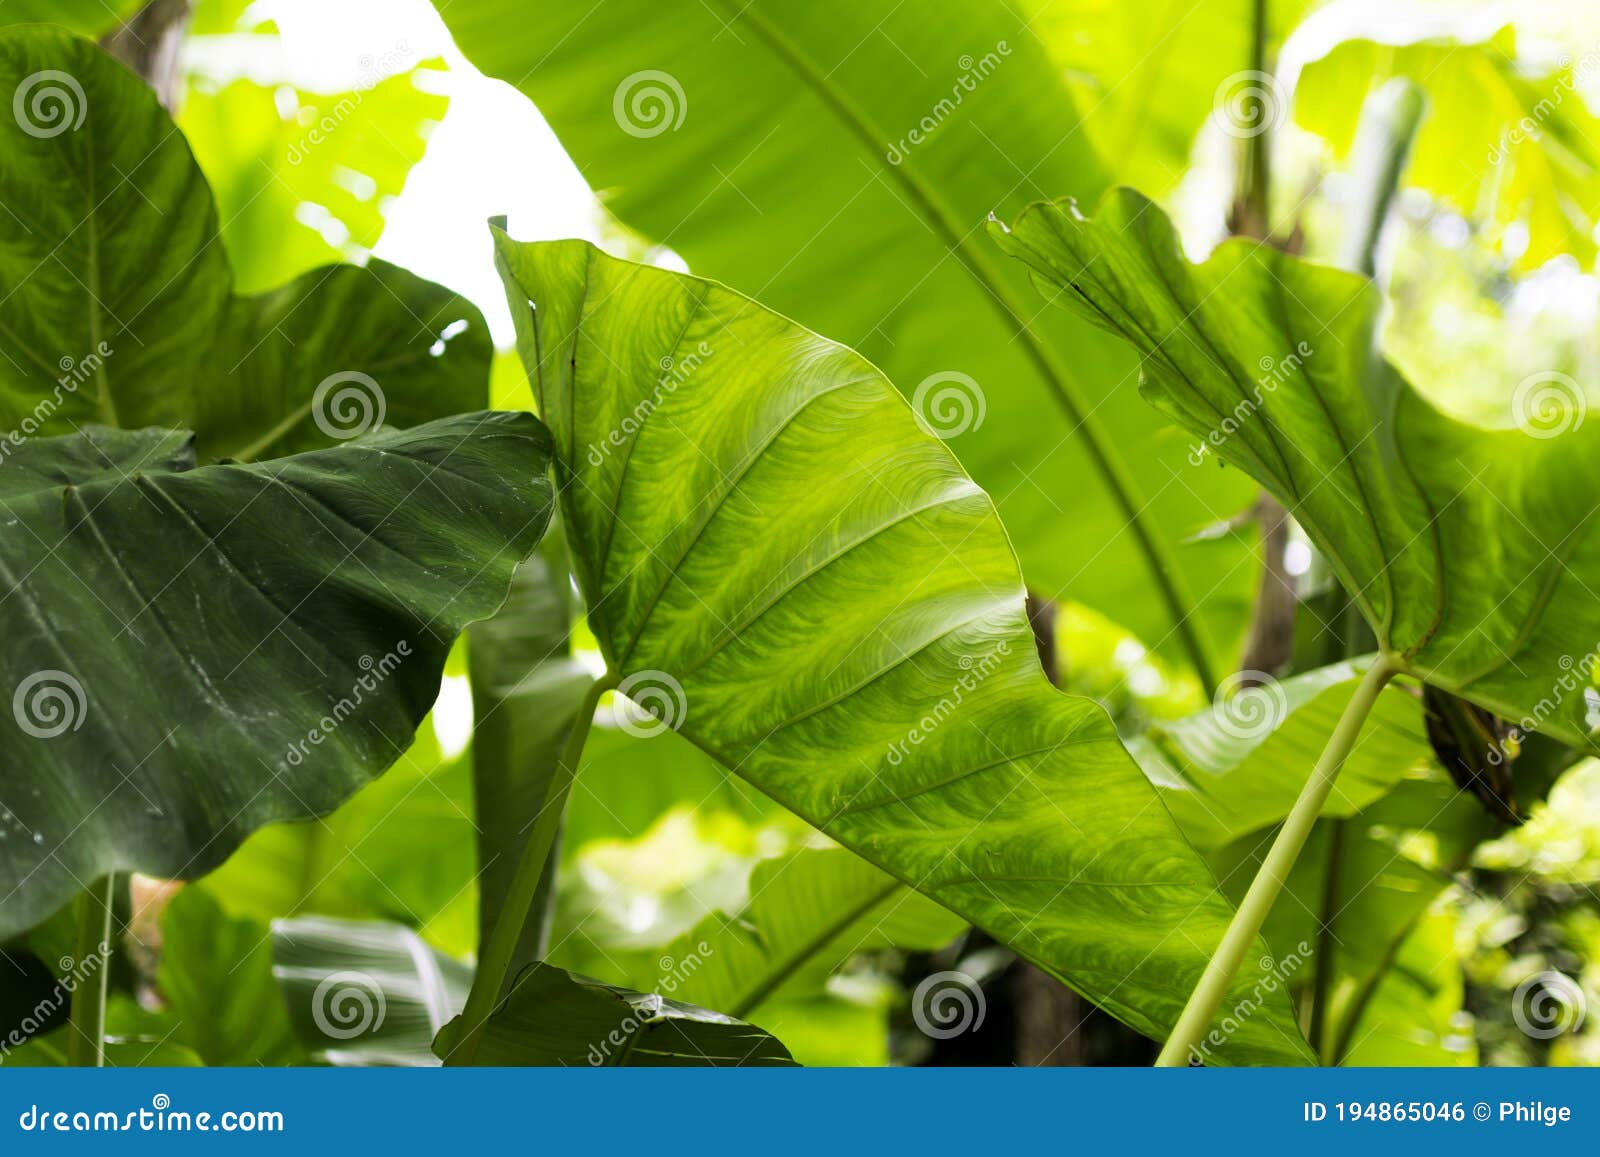 Plant With Giant Leaves Very Large Leaves Called The Giant Elephant S Ear Alocasia Macrorrhiza